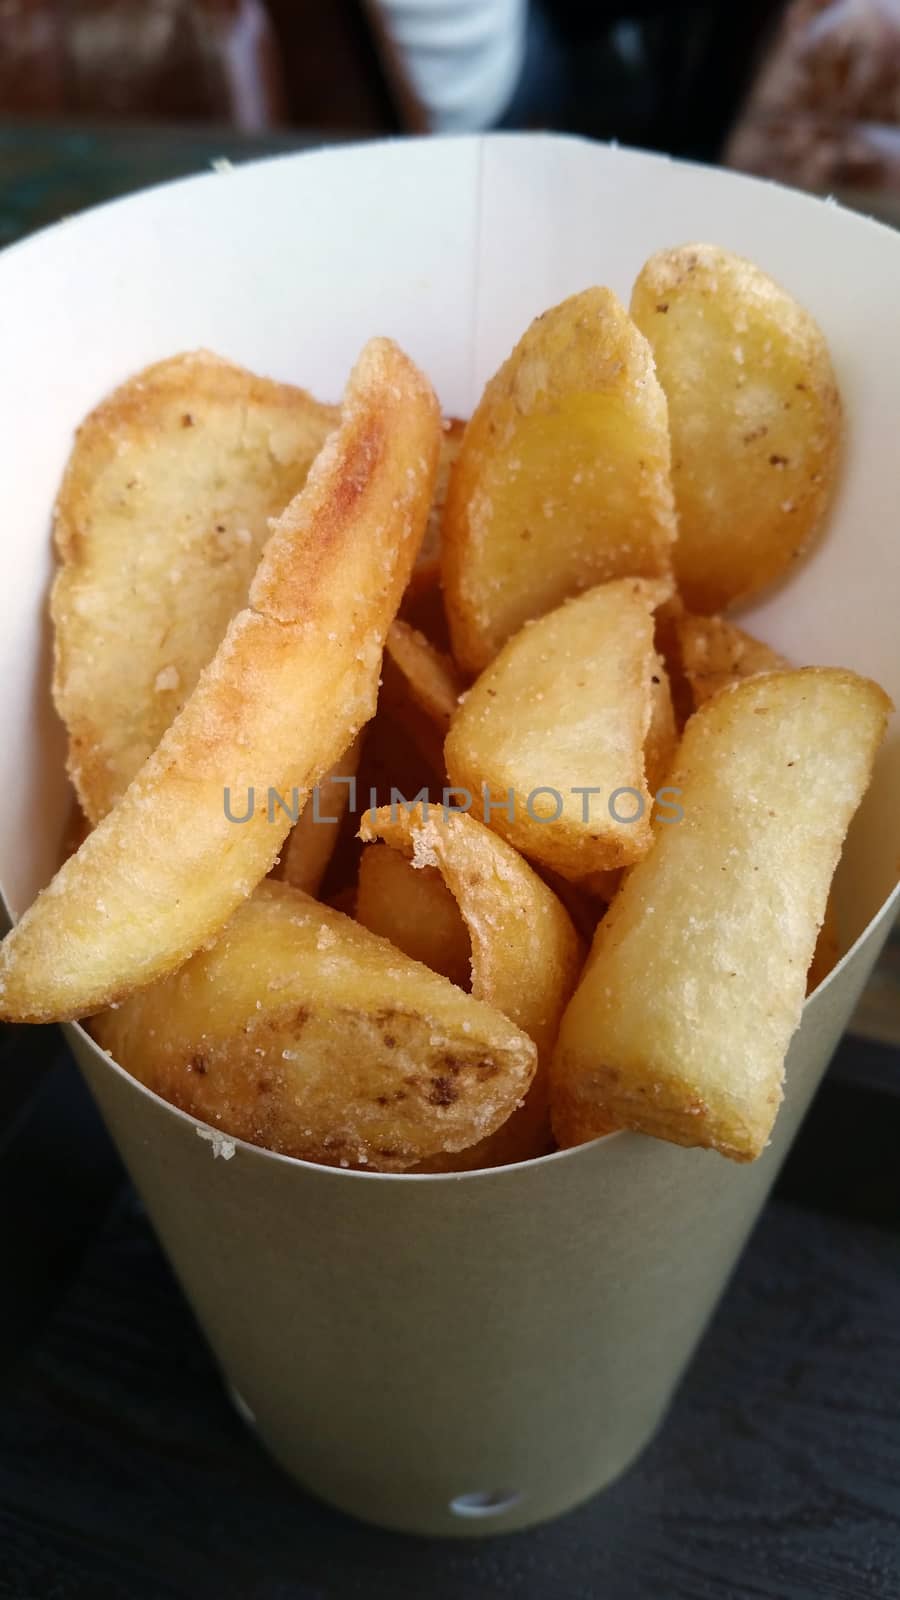 Fried Potatoes Wedges in a Paper Wrapper